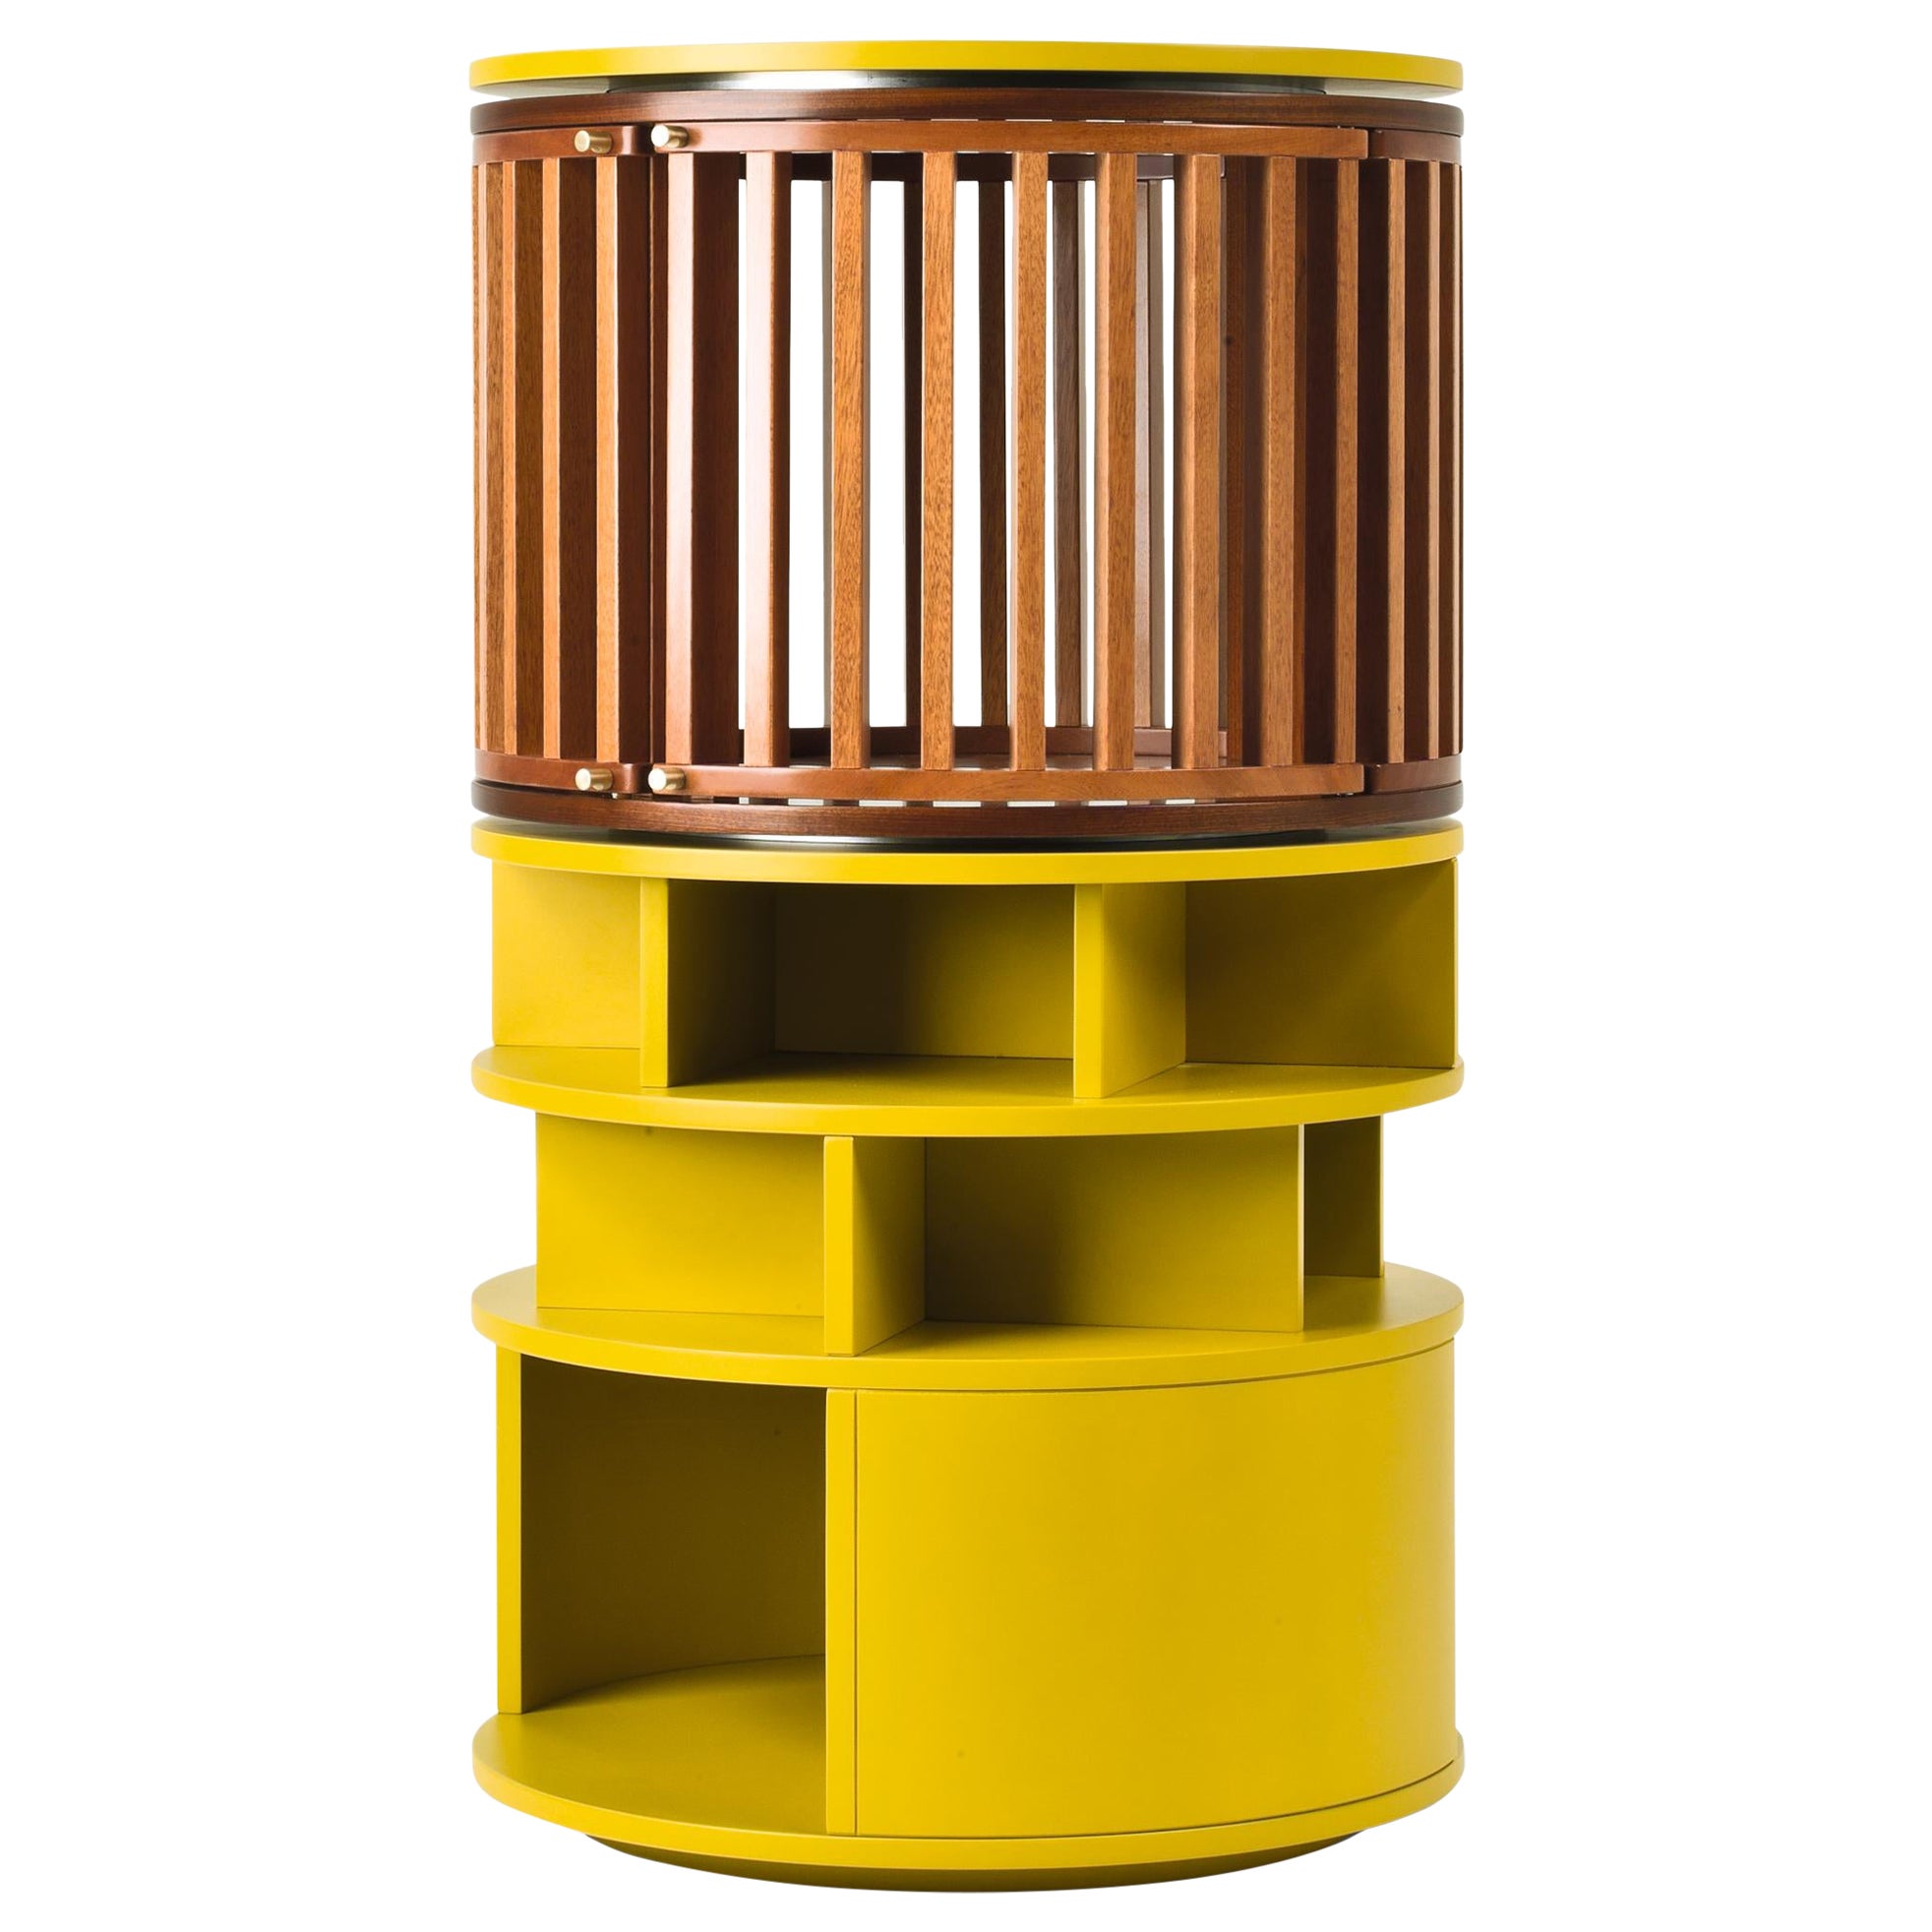 Babel Cylindrical Revolving Cabinet in natural Mahogany Finishing and Yellow For Sale